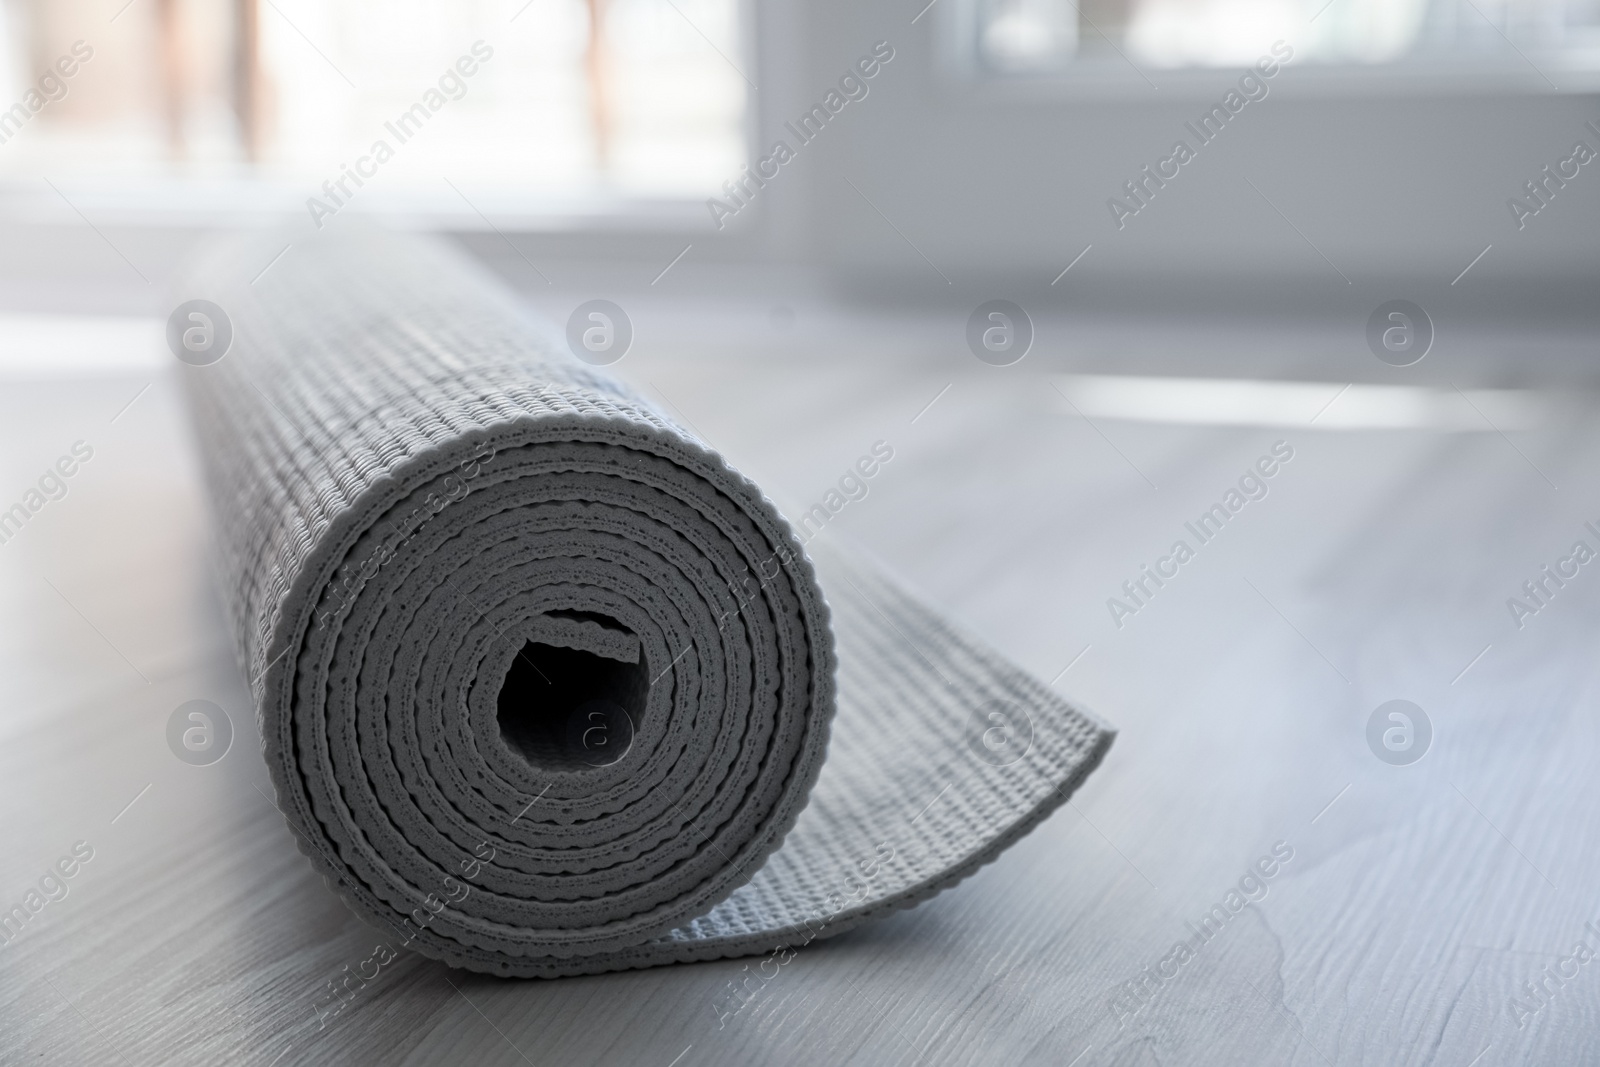 Photo of Karemat or fitness mat on floor, closeup. Space for text